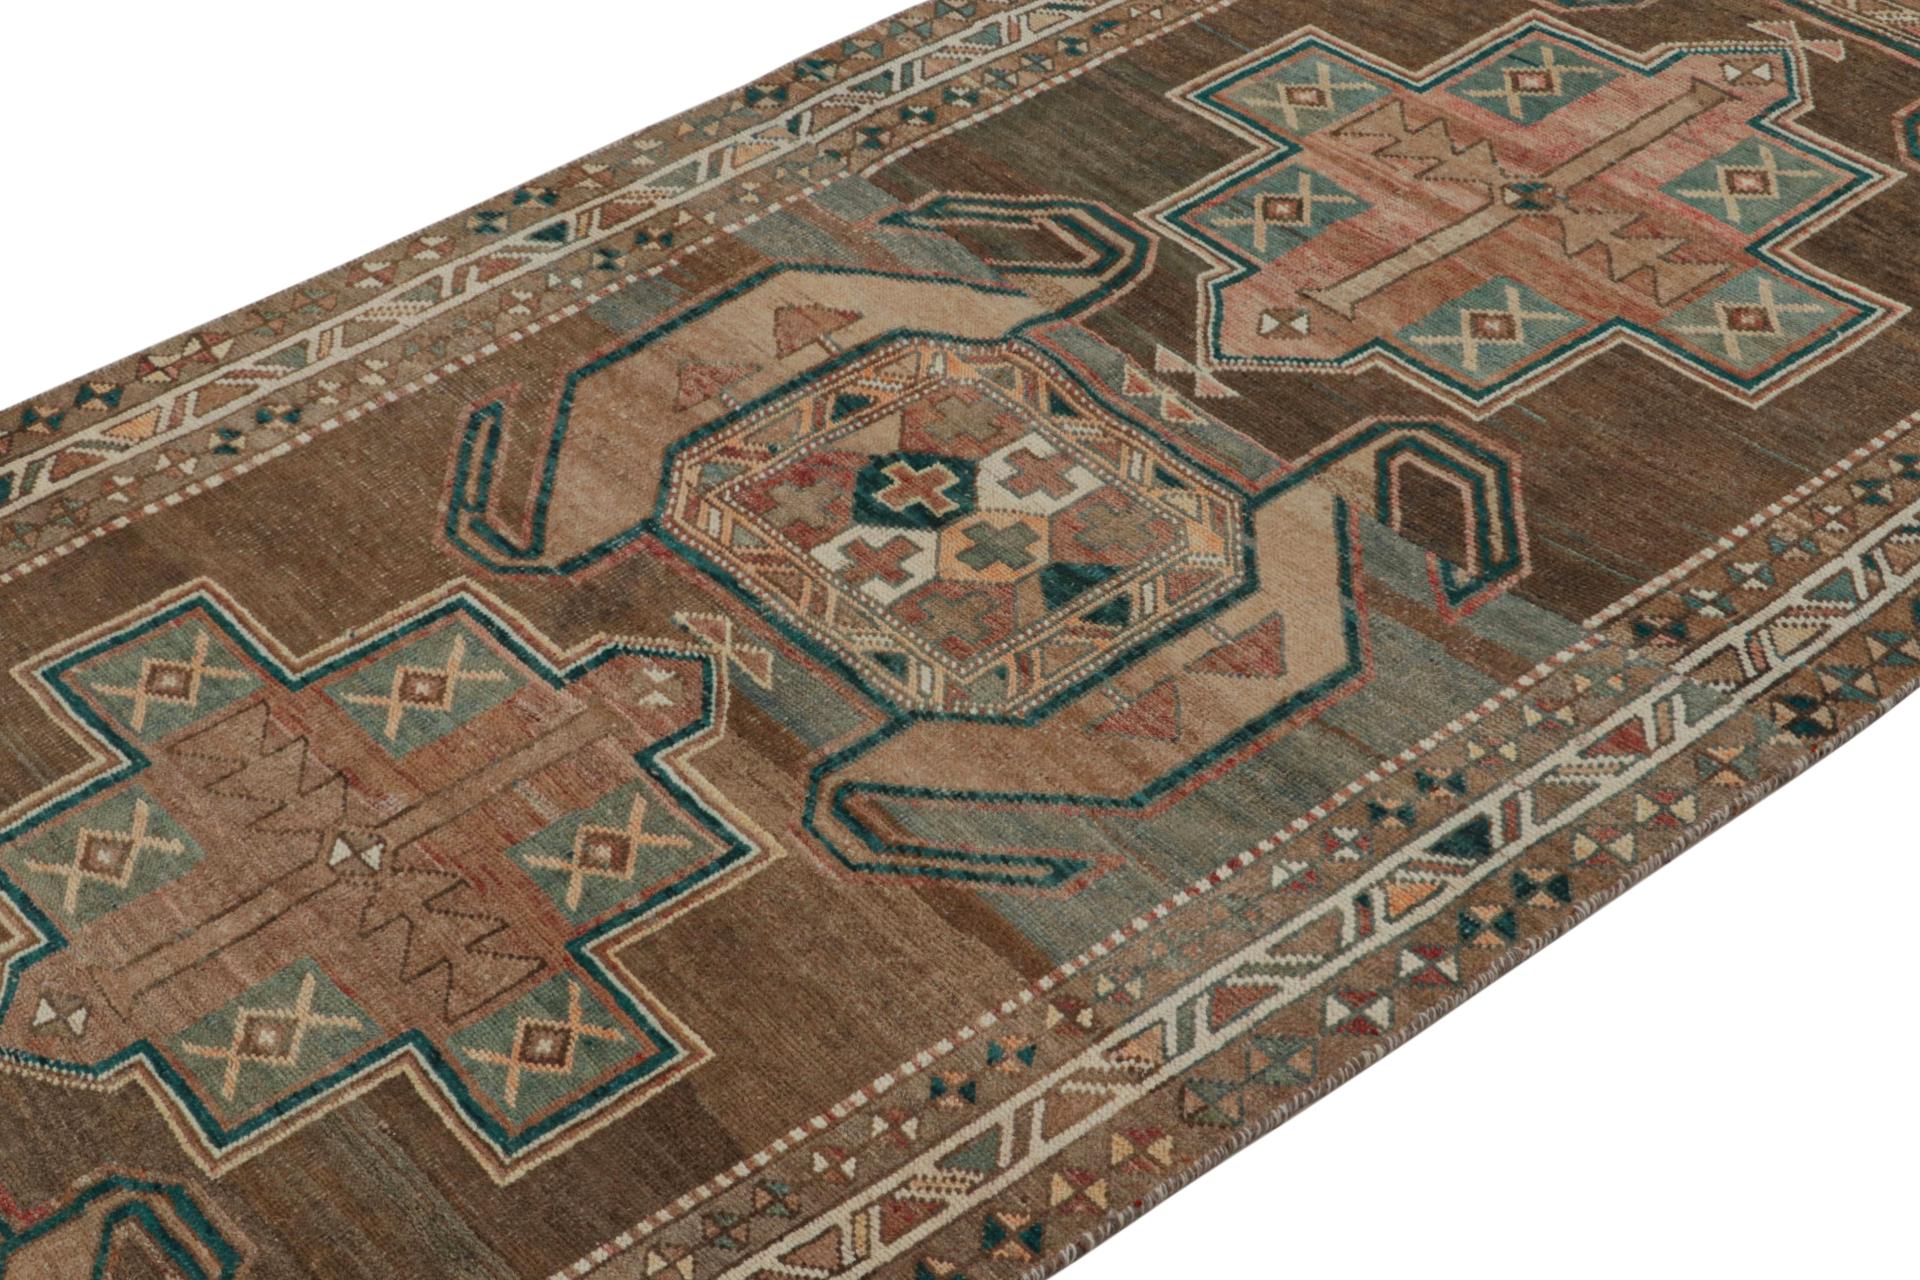 Vintage Persian Shiraz rug in Beige, Brown & Blue Tribal Patterns by Rug & Kilim In Good Condition For Sale In Long Island City, NY